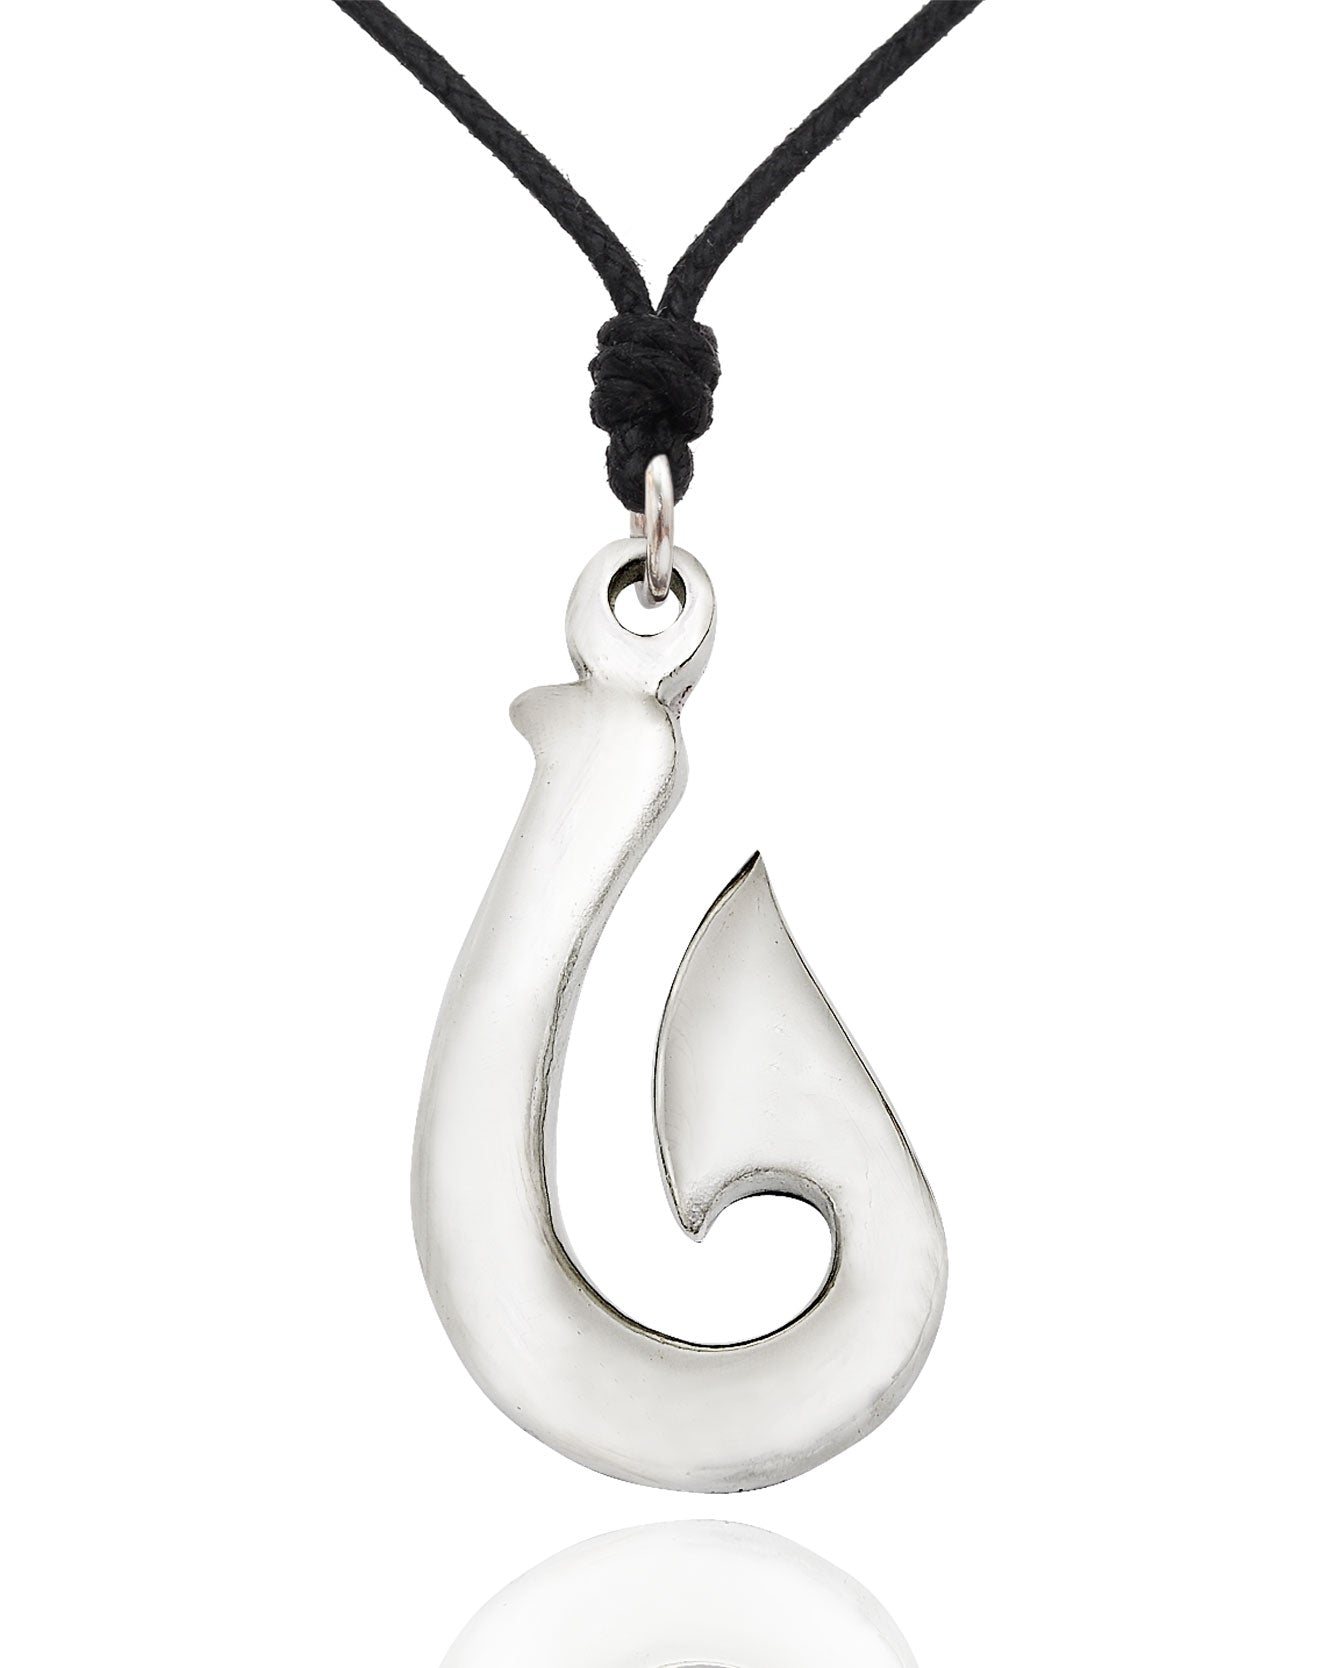 Maori Fishing Hook Silver Pewter Charm Necklace Pendant Jewelry –